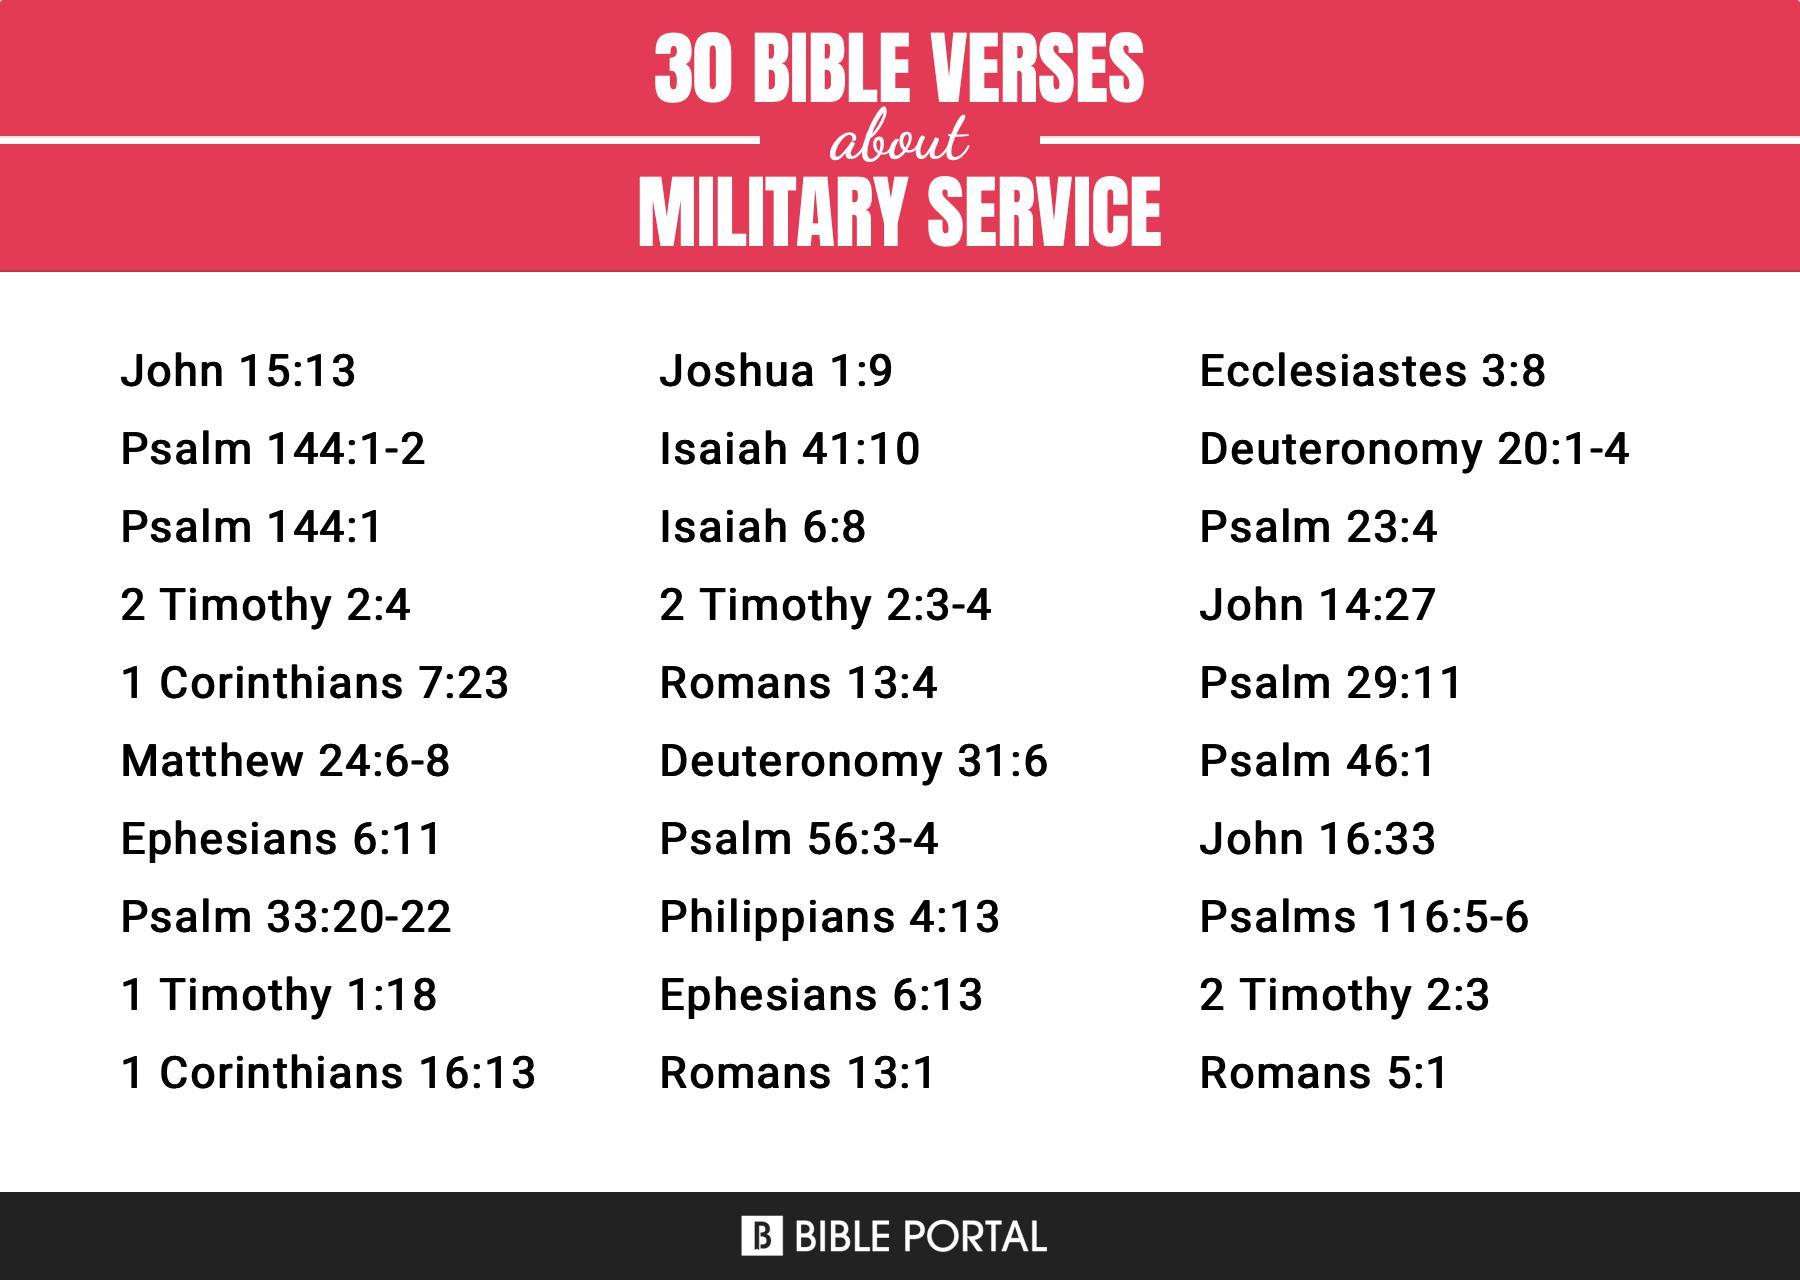 What Does the Bible Say about Military Service?